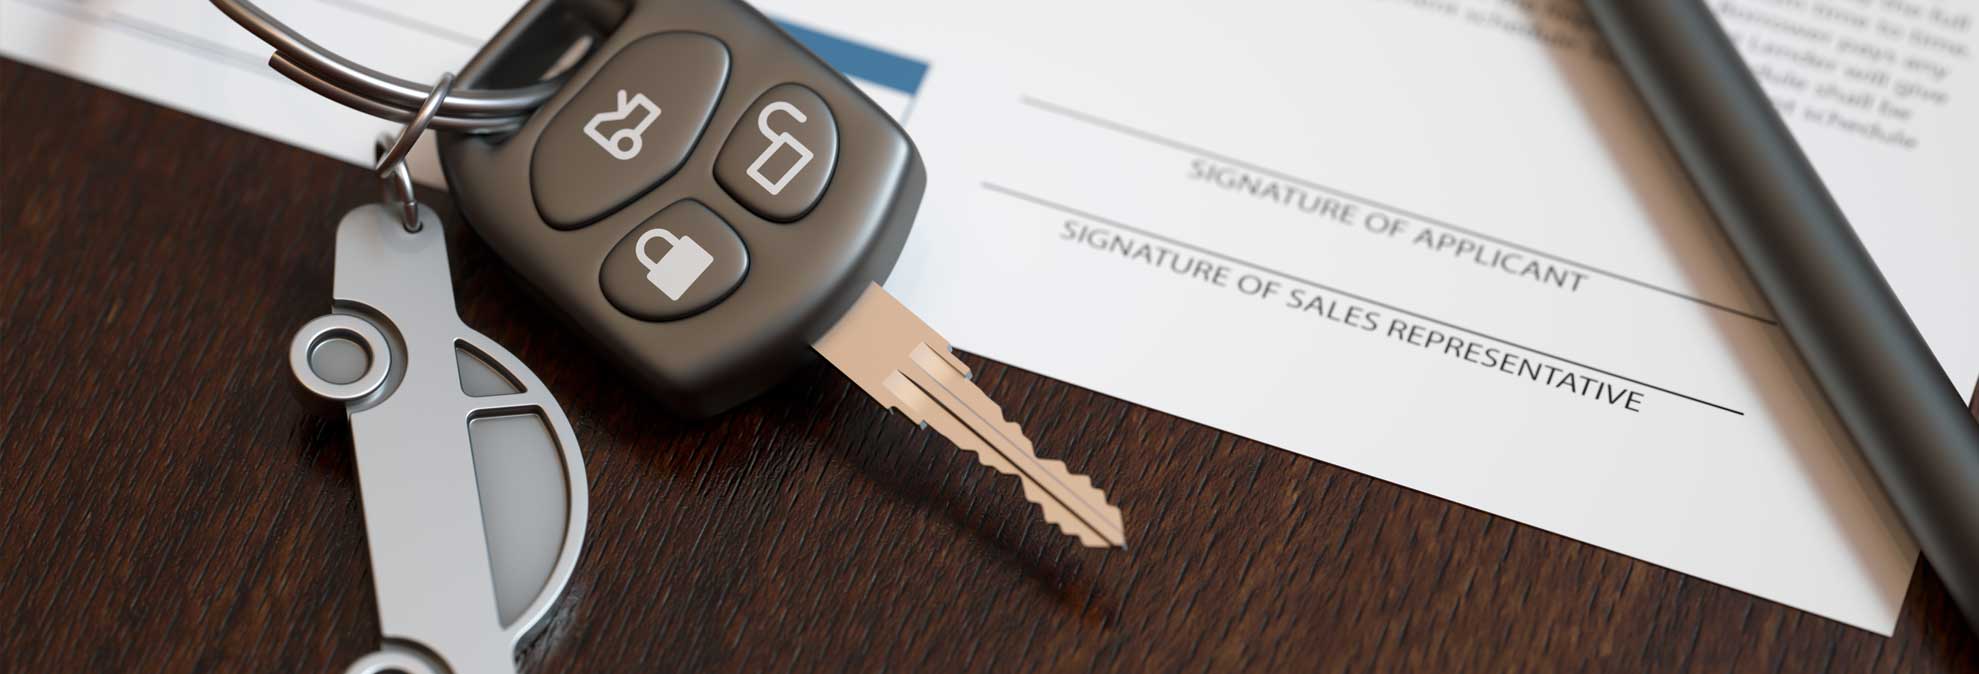 What are some common terms and conditions in a vehicle purchase agreement?